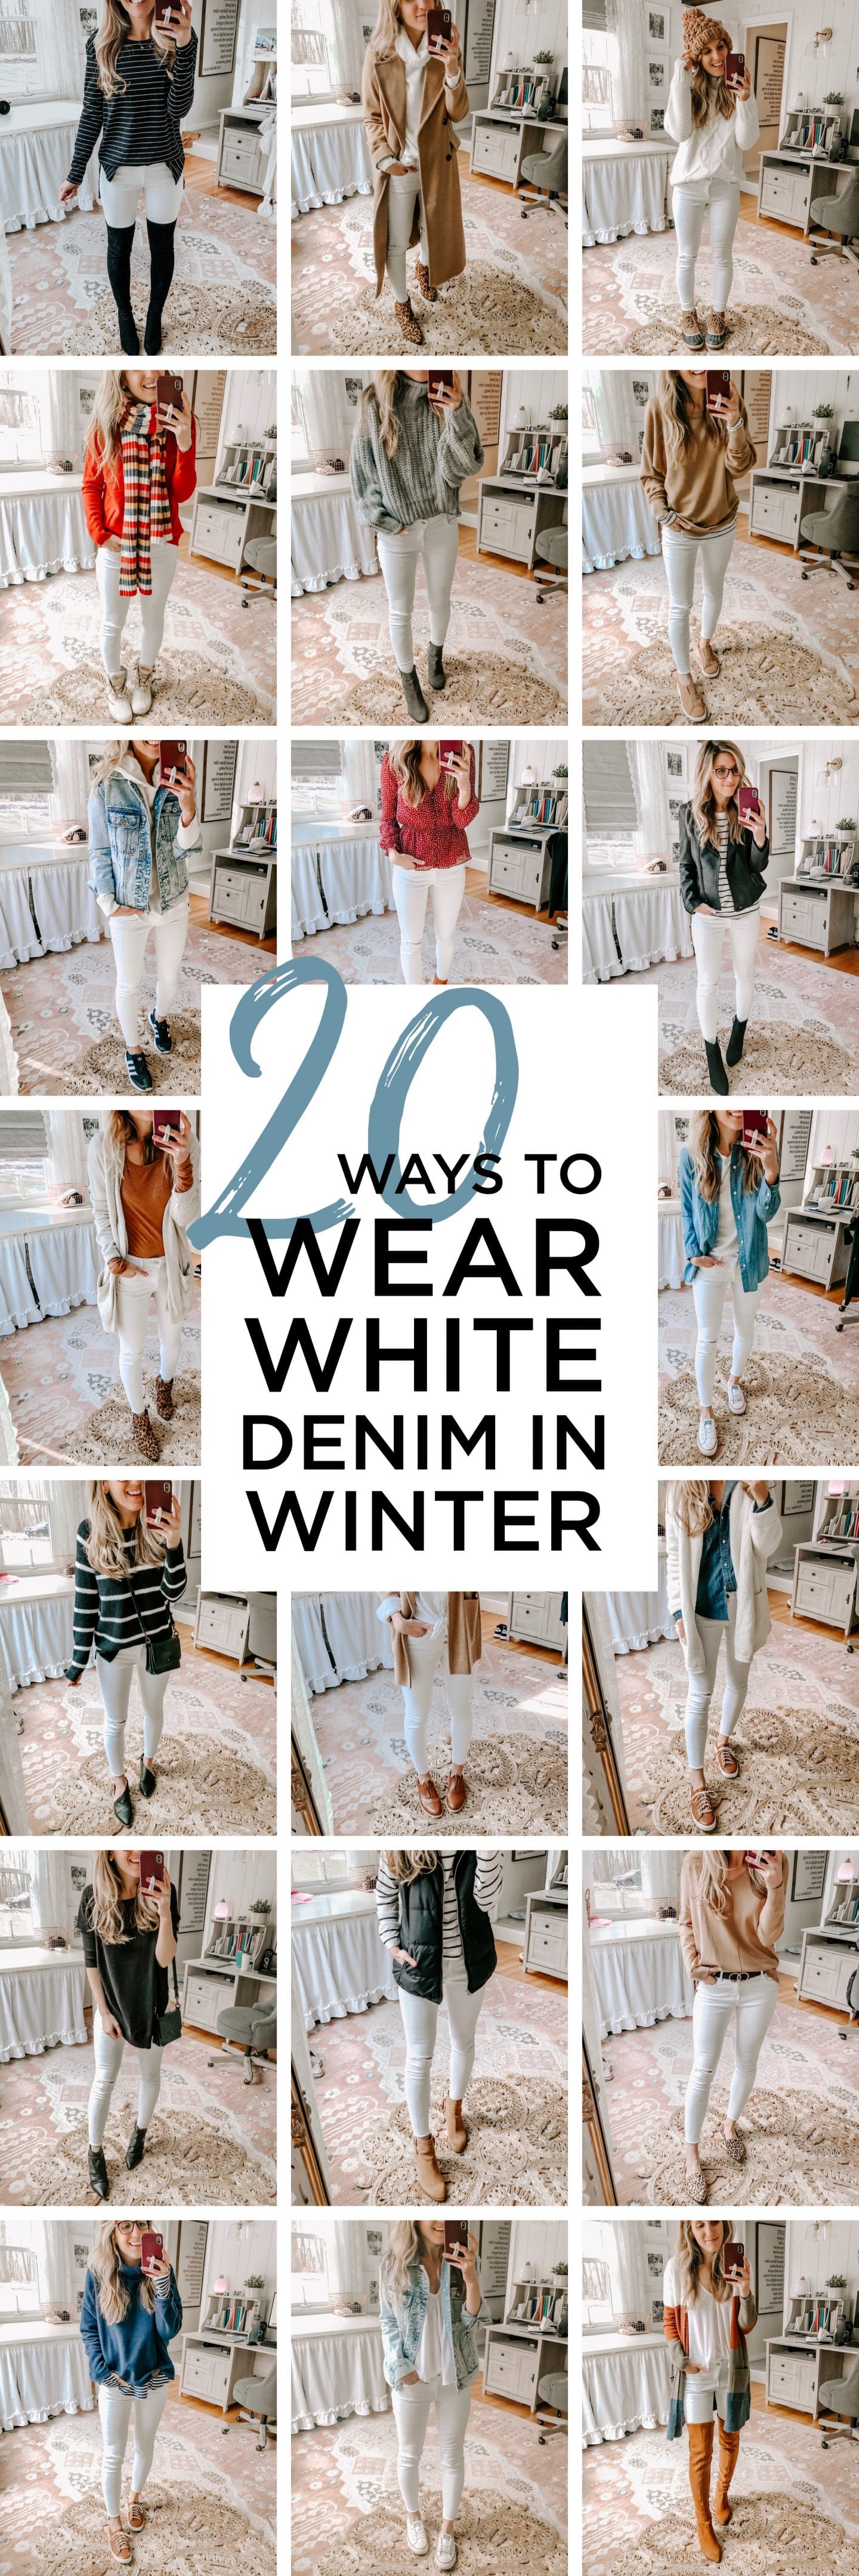 20 Ways on How to Style White Denim in Winter with Motherhood Life & Style blogger, Lynzy & Co.